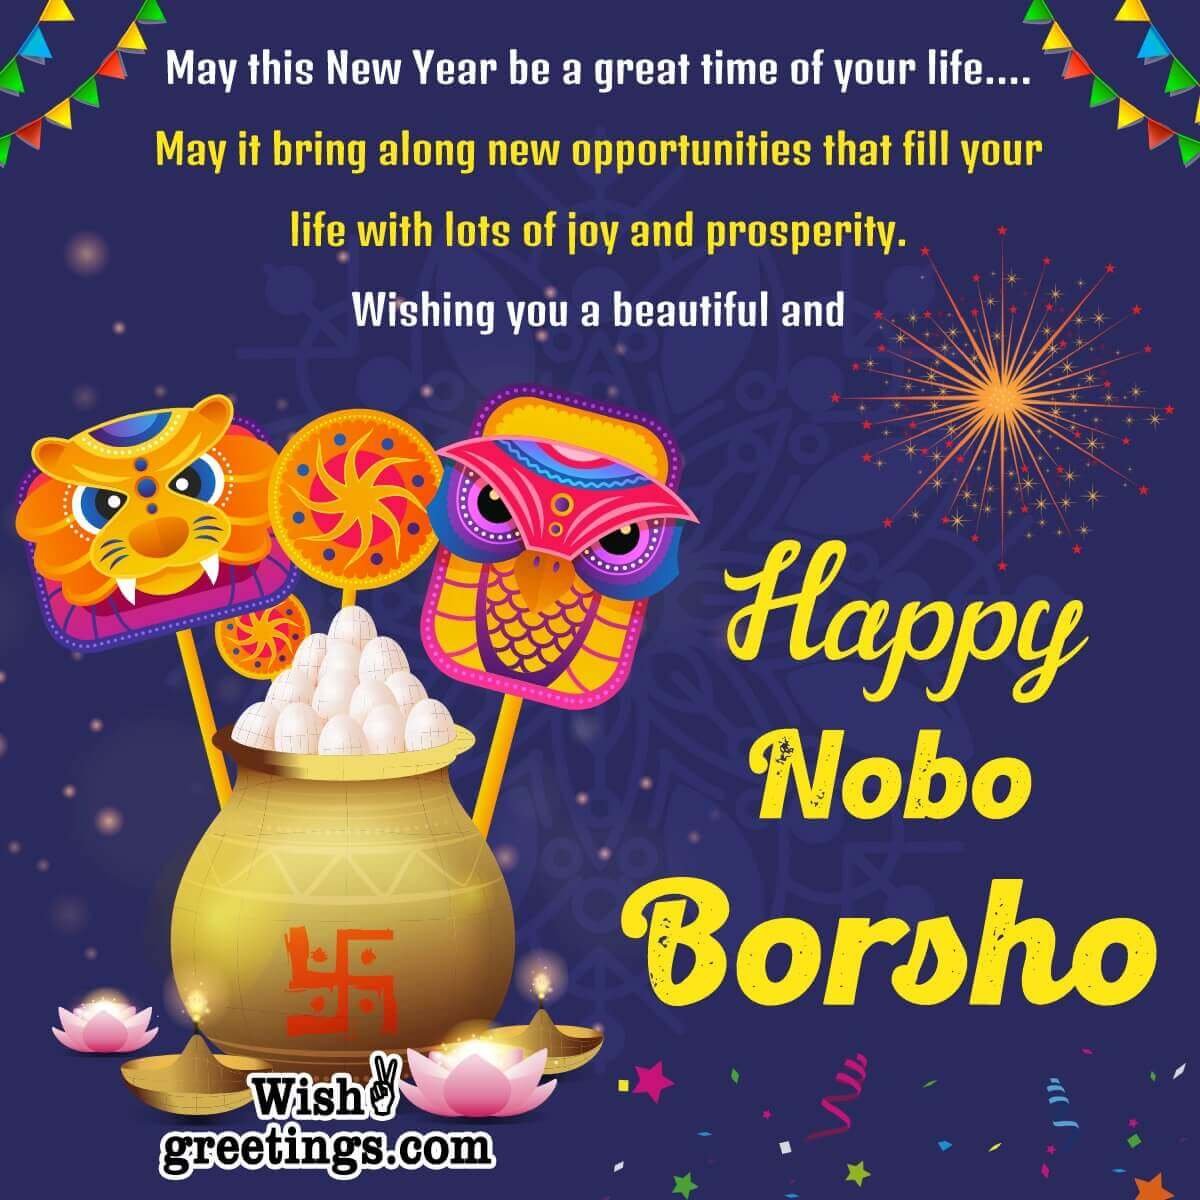 Bengali New Year Wishes Messages - Wish Greetings